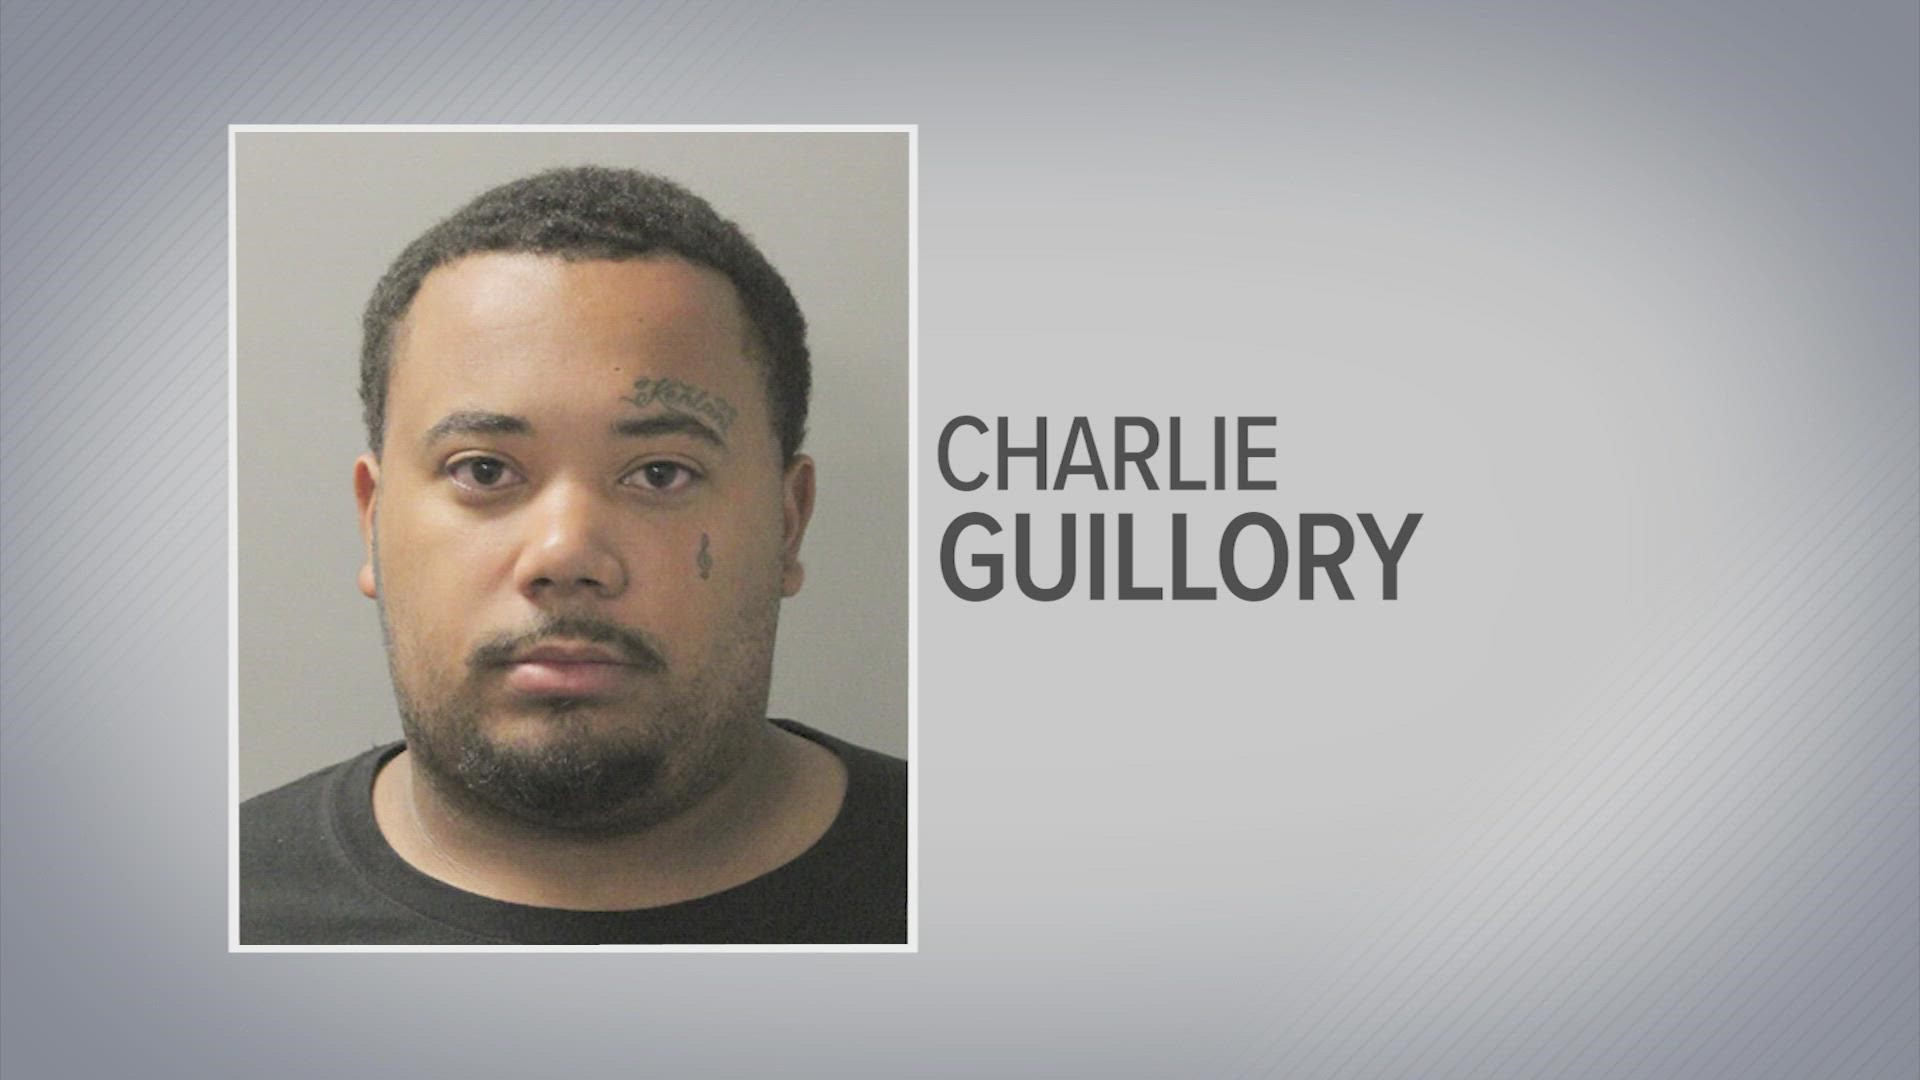 Houston Police said Charlie Guillory is wanted for questioning in the shooting that left one man dead and another injured, but he has not been charged.